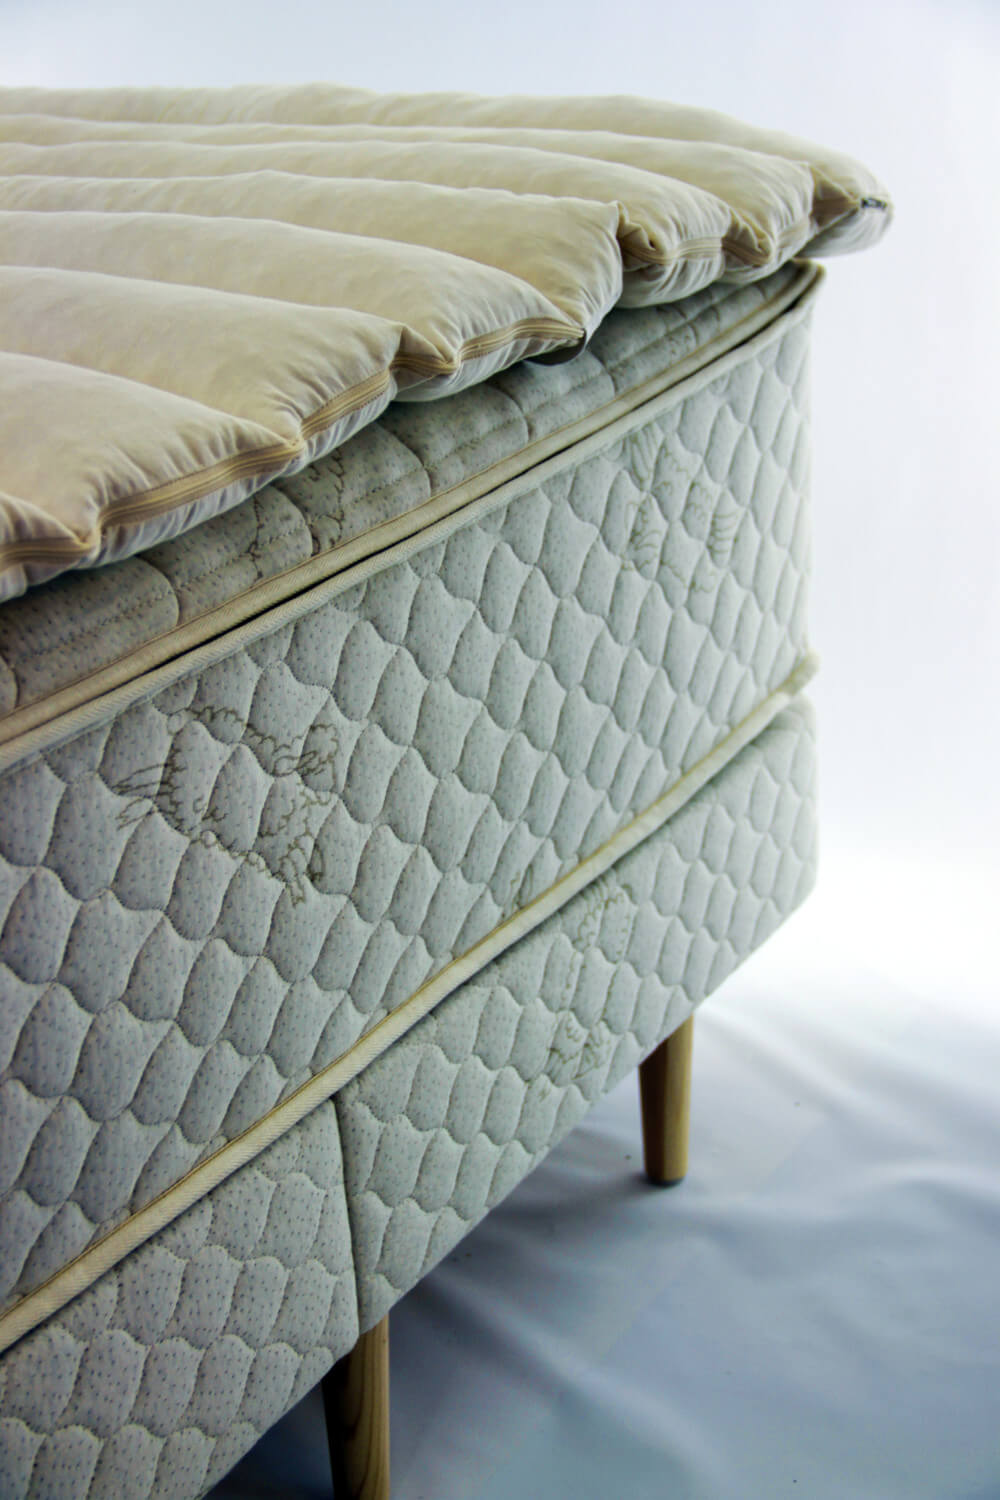 Luxurious 100% Natural Talalay Latex Mattress Toppers | FloBeds